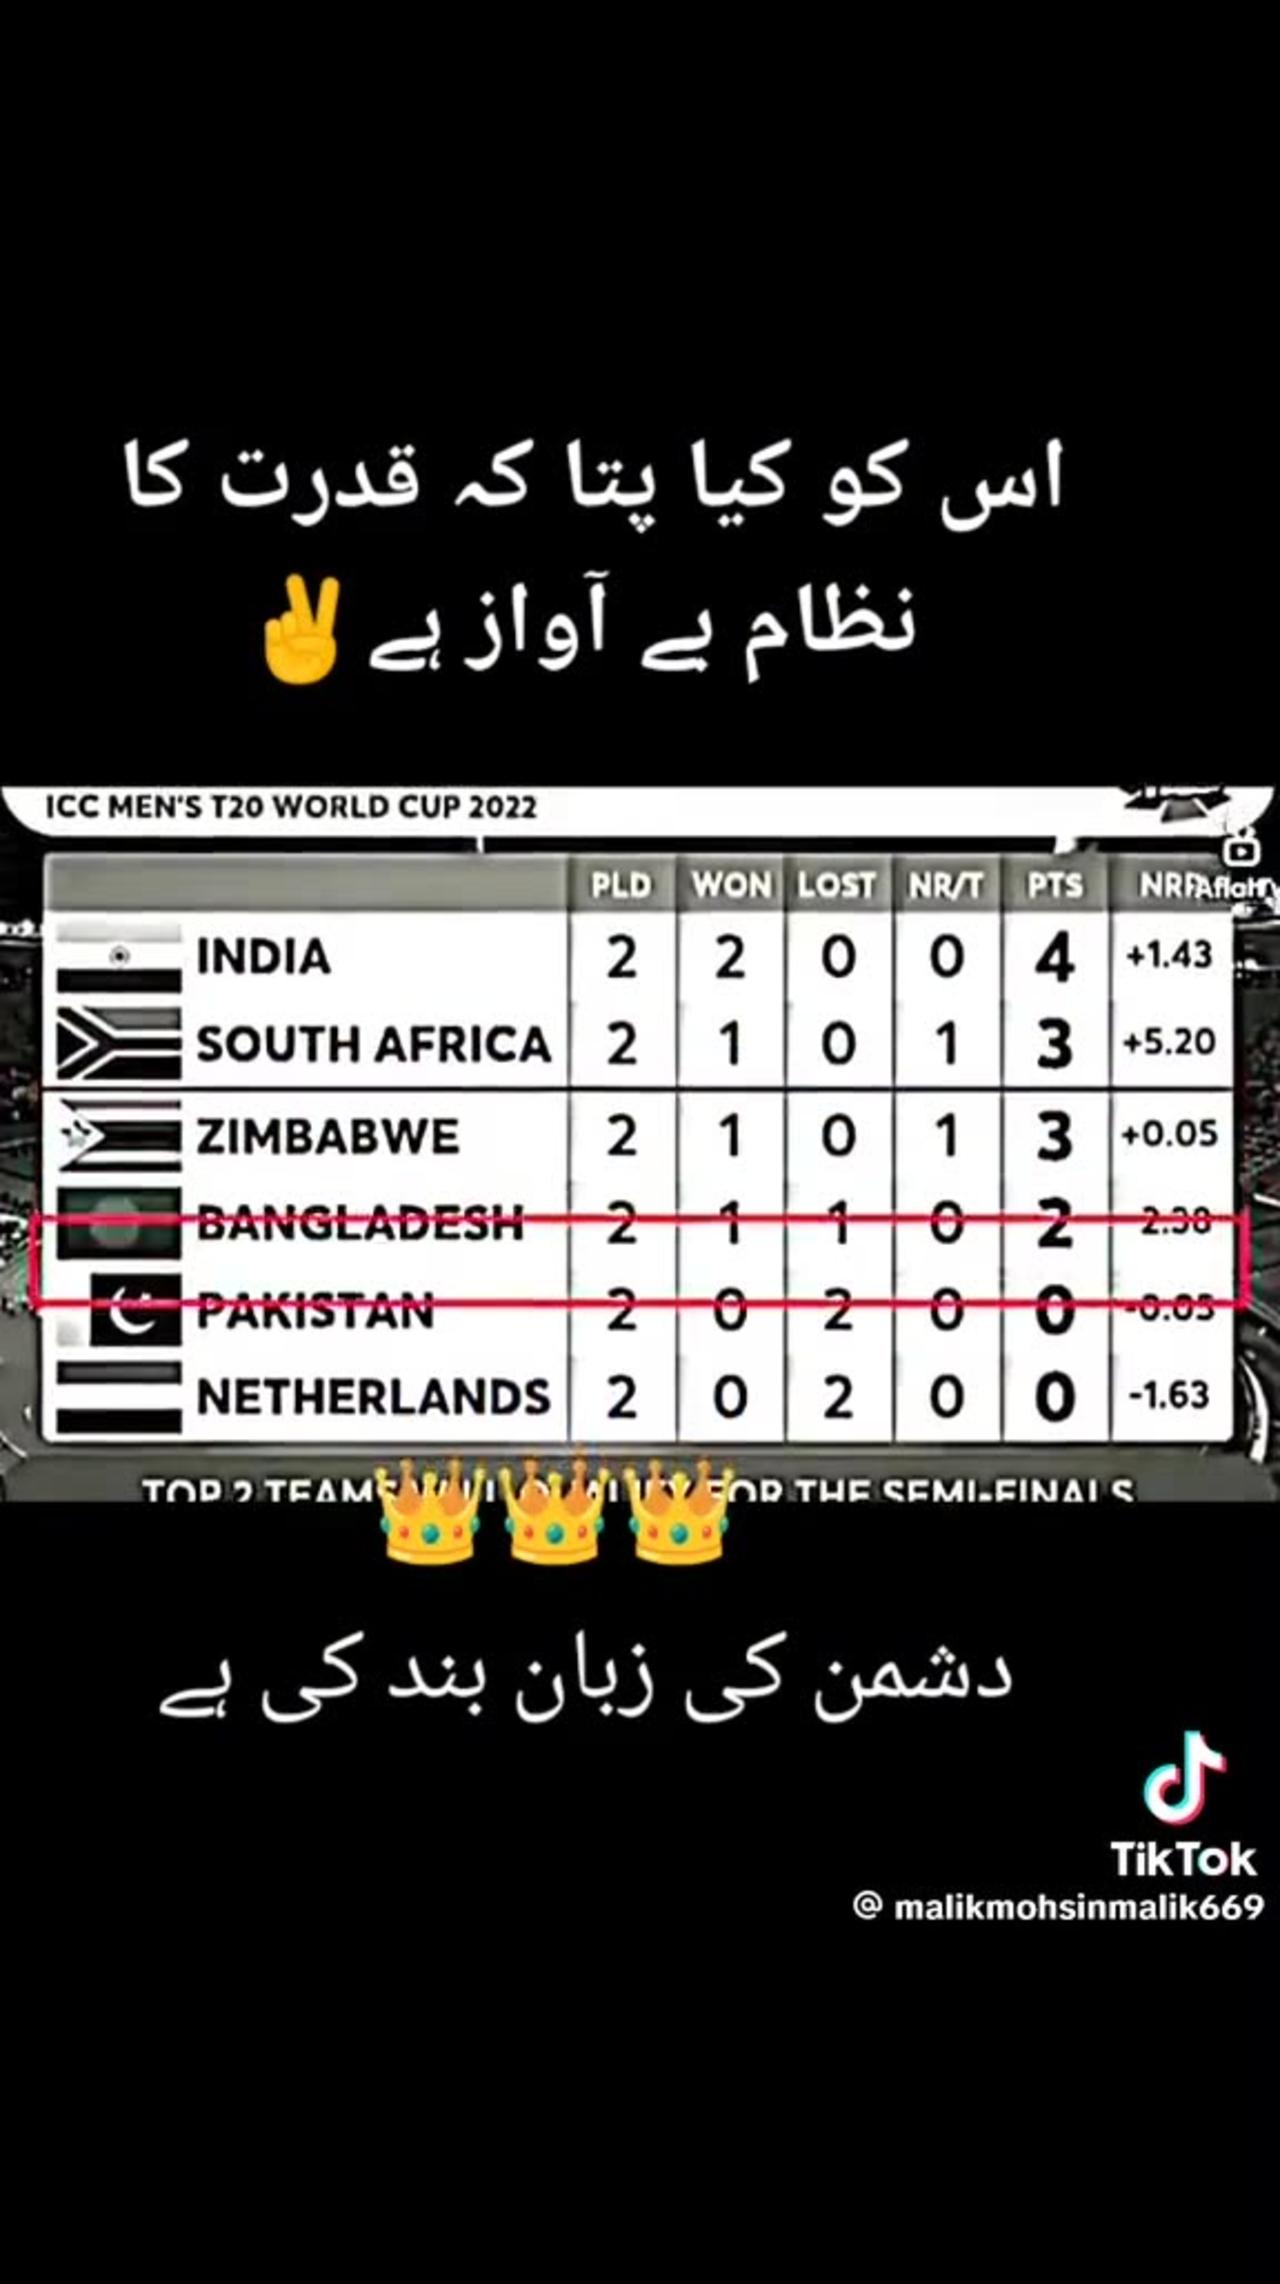 First matches Pakistan loss then he gave a chance